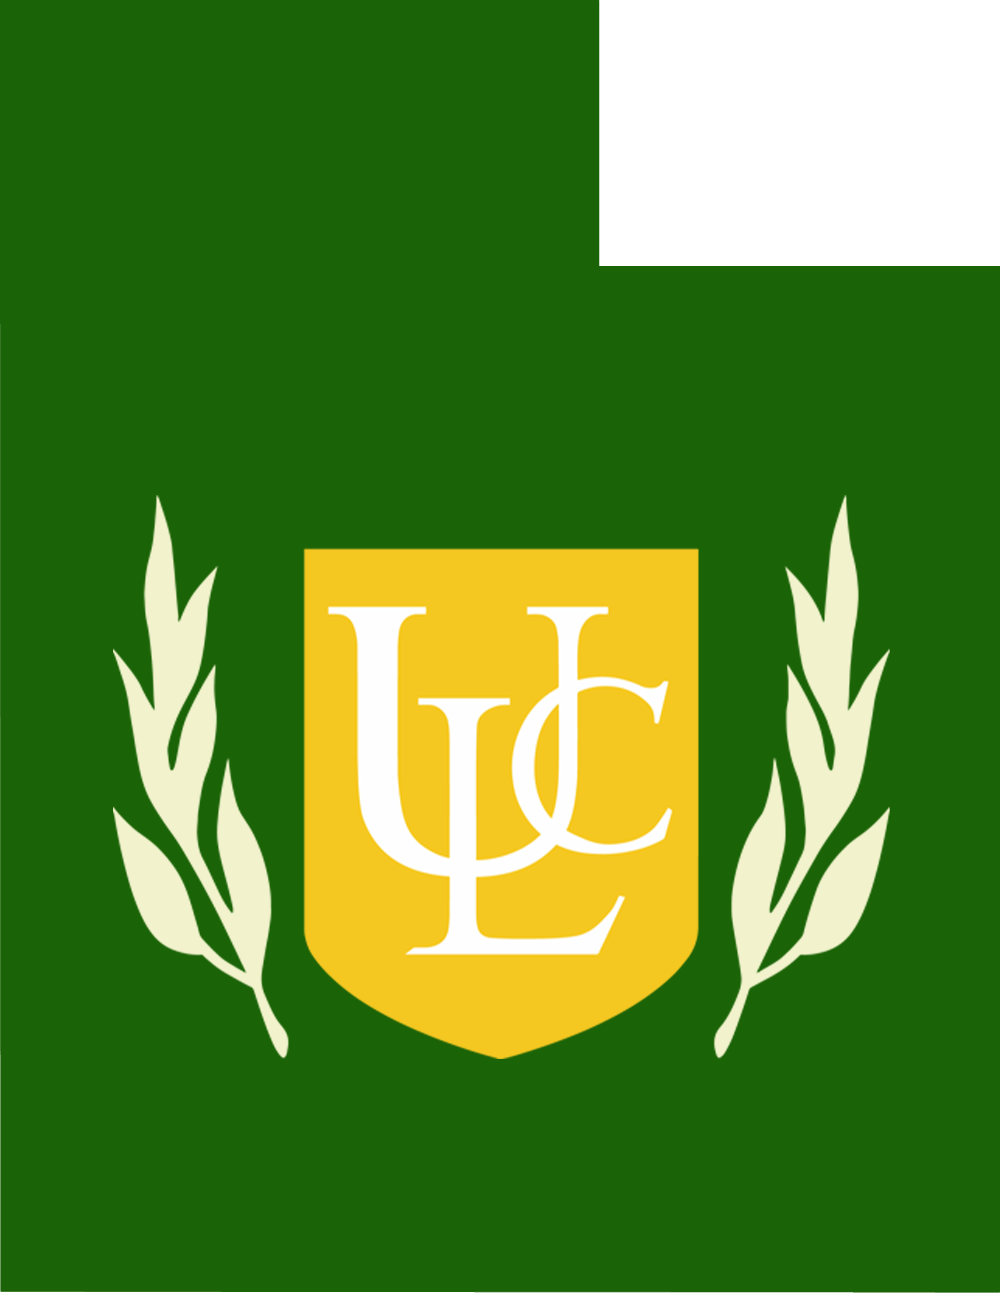 An outline of UT with the ULC logo